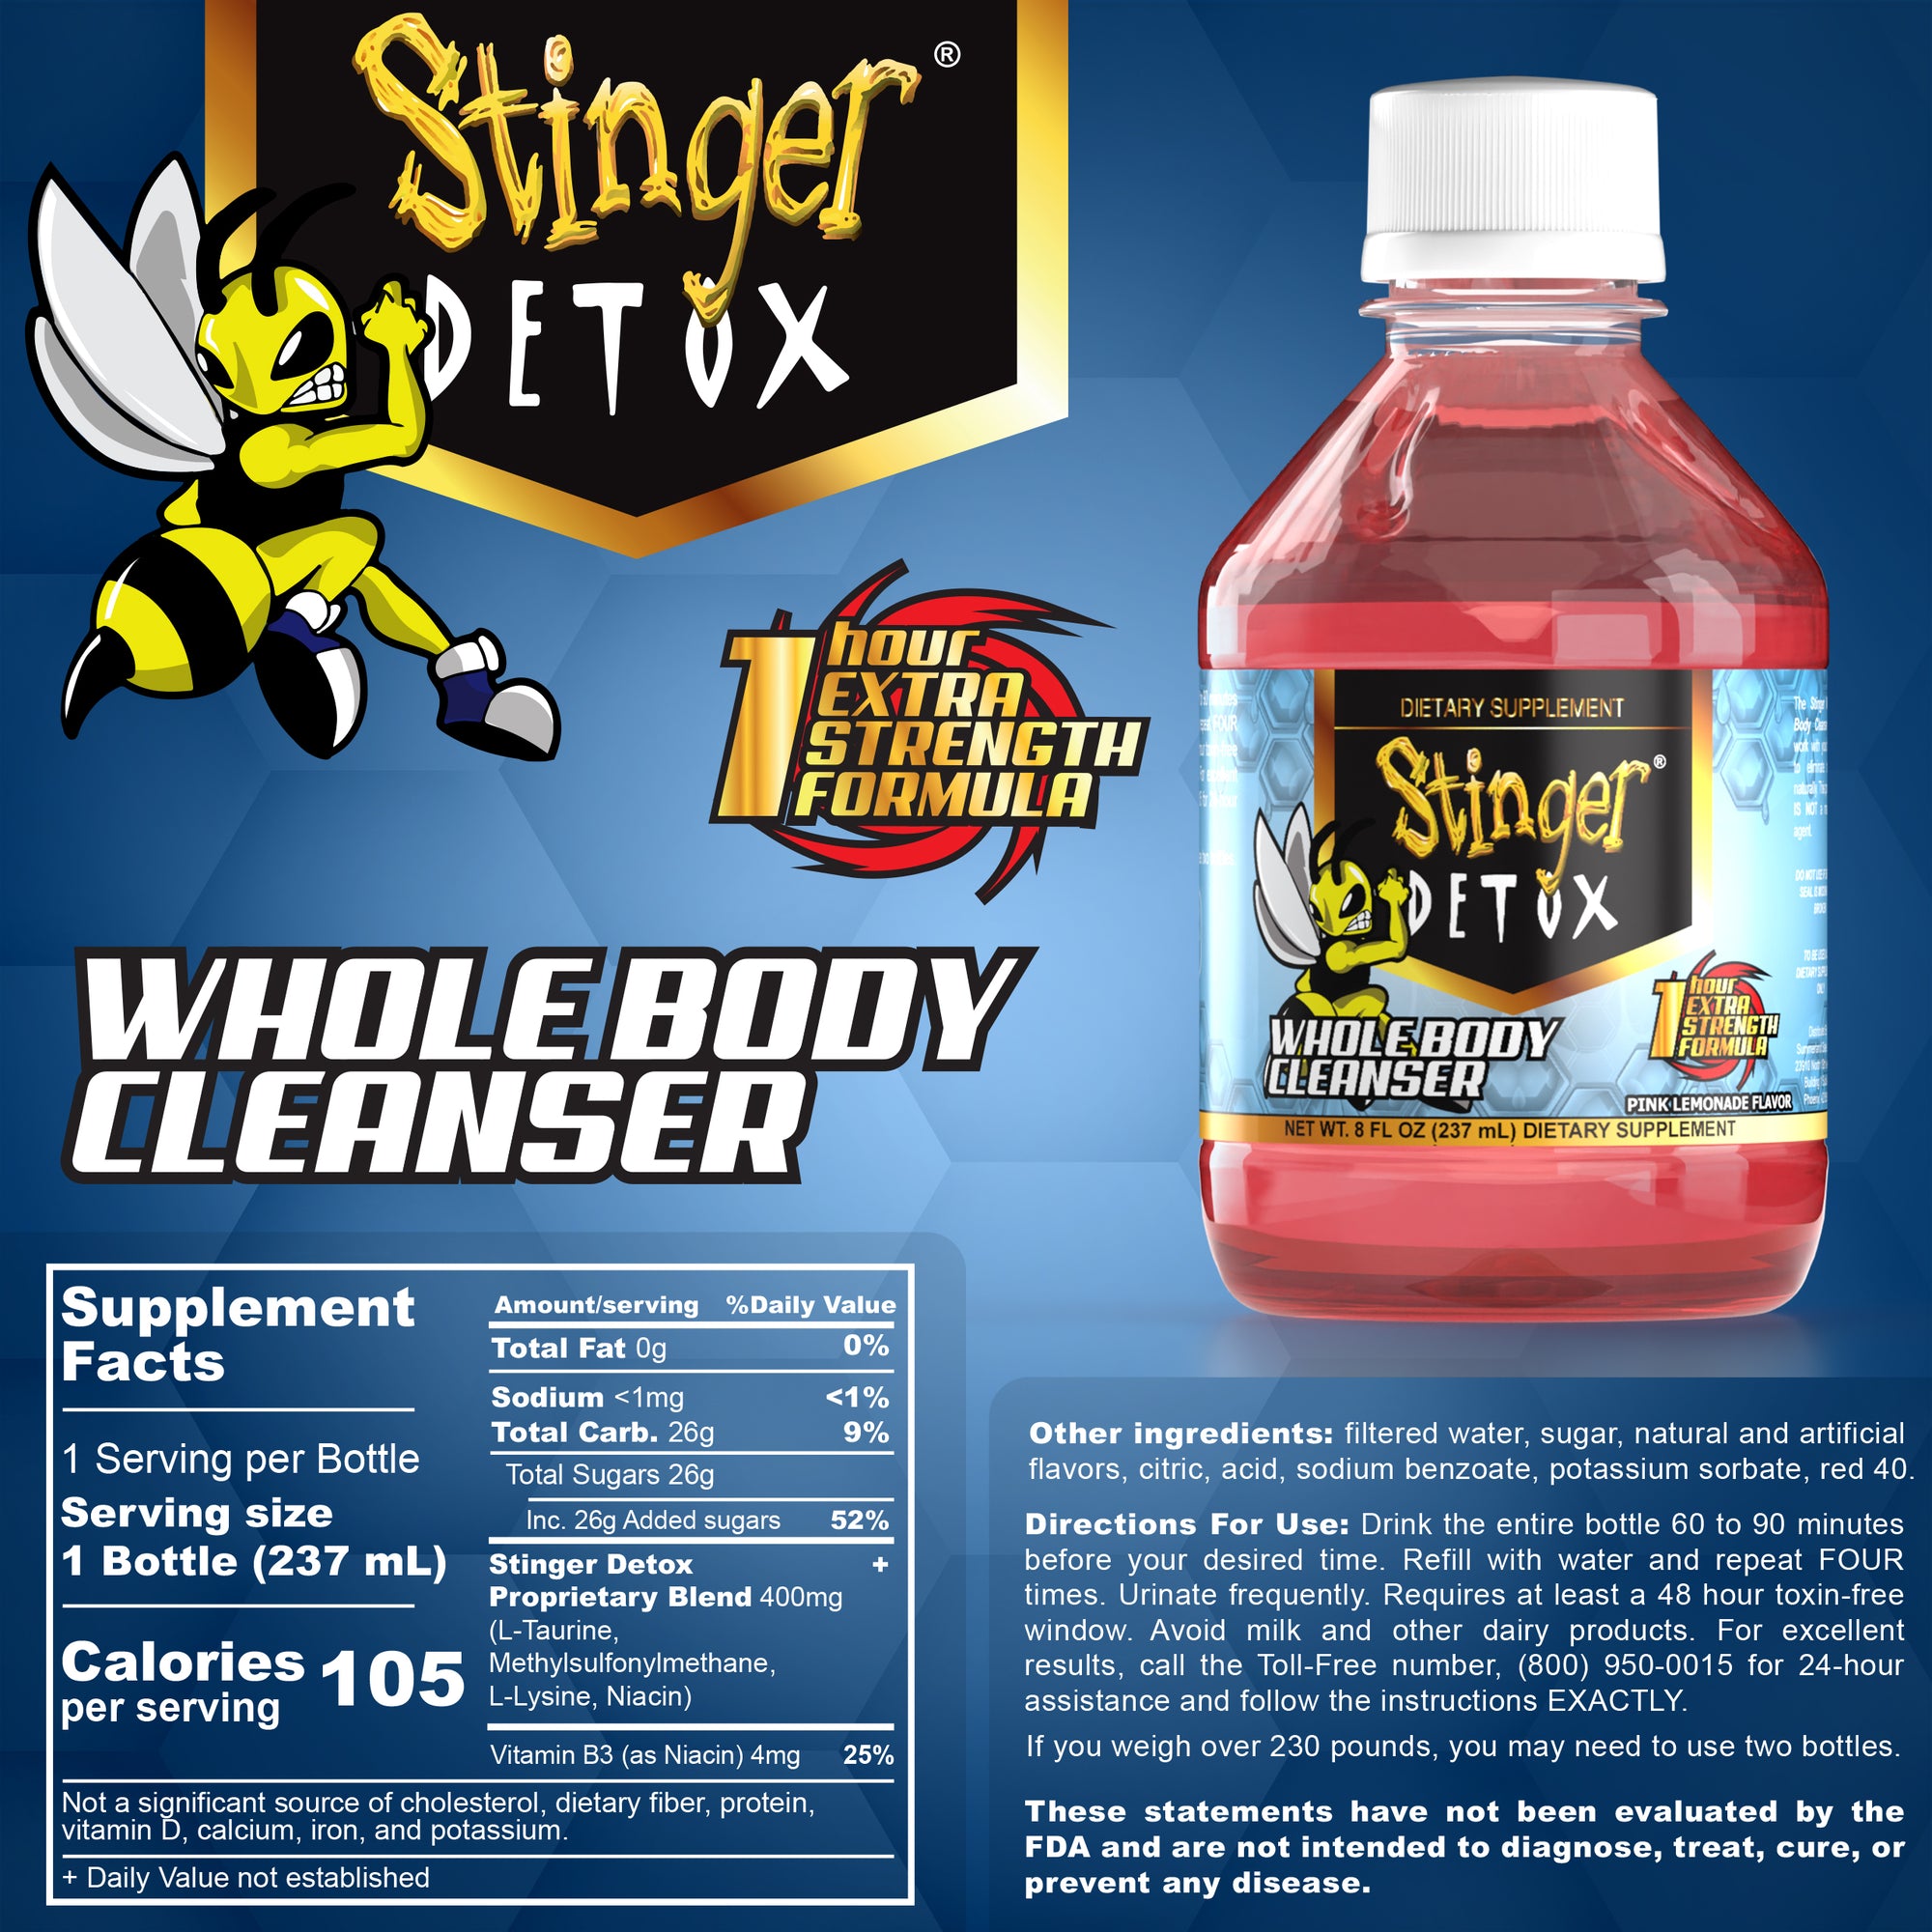 Whole Body Cleanser 1-Hour Extra Strength Formula